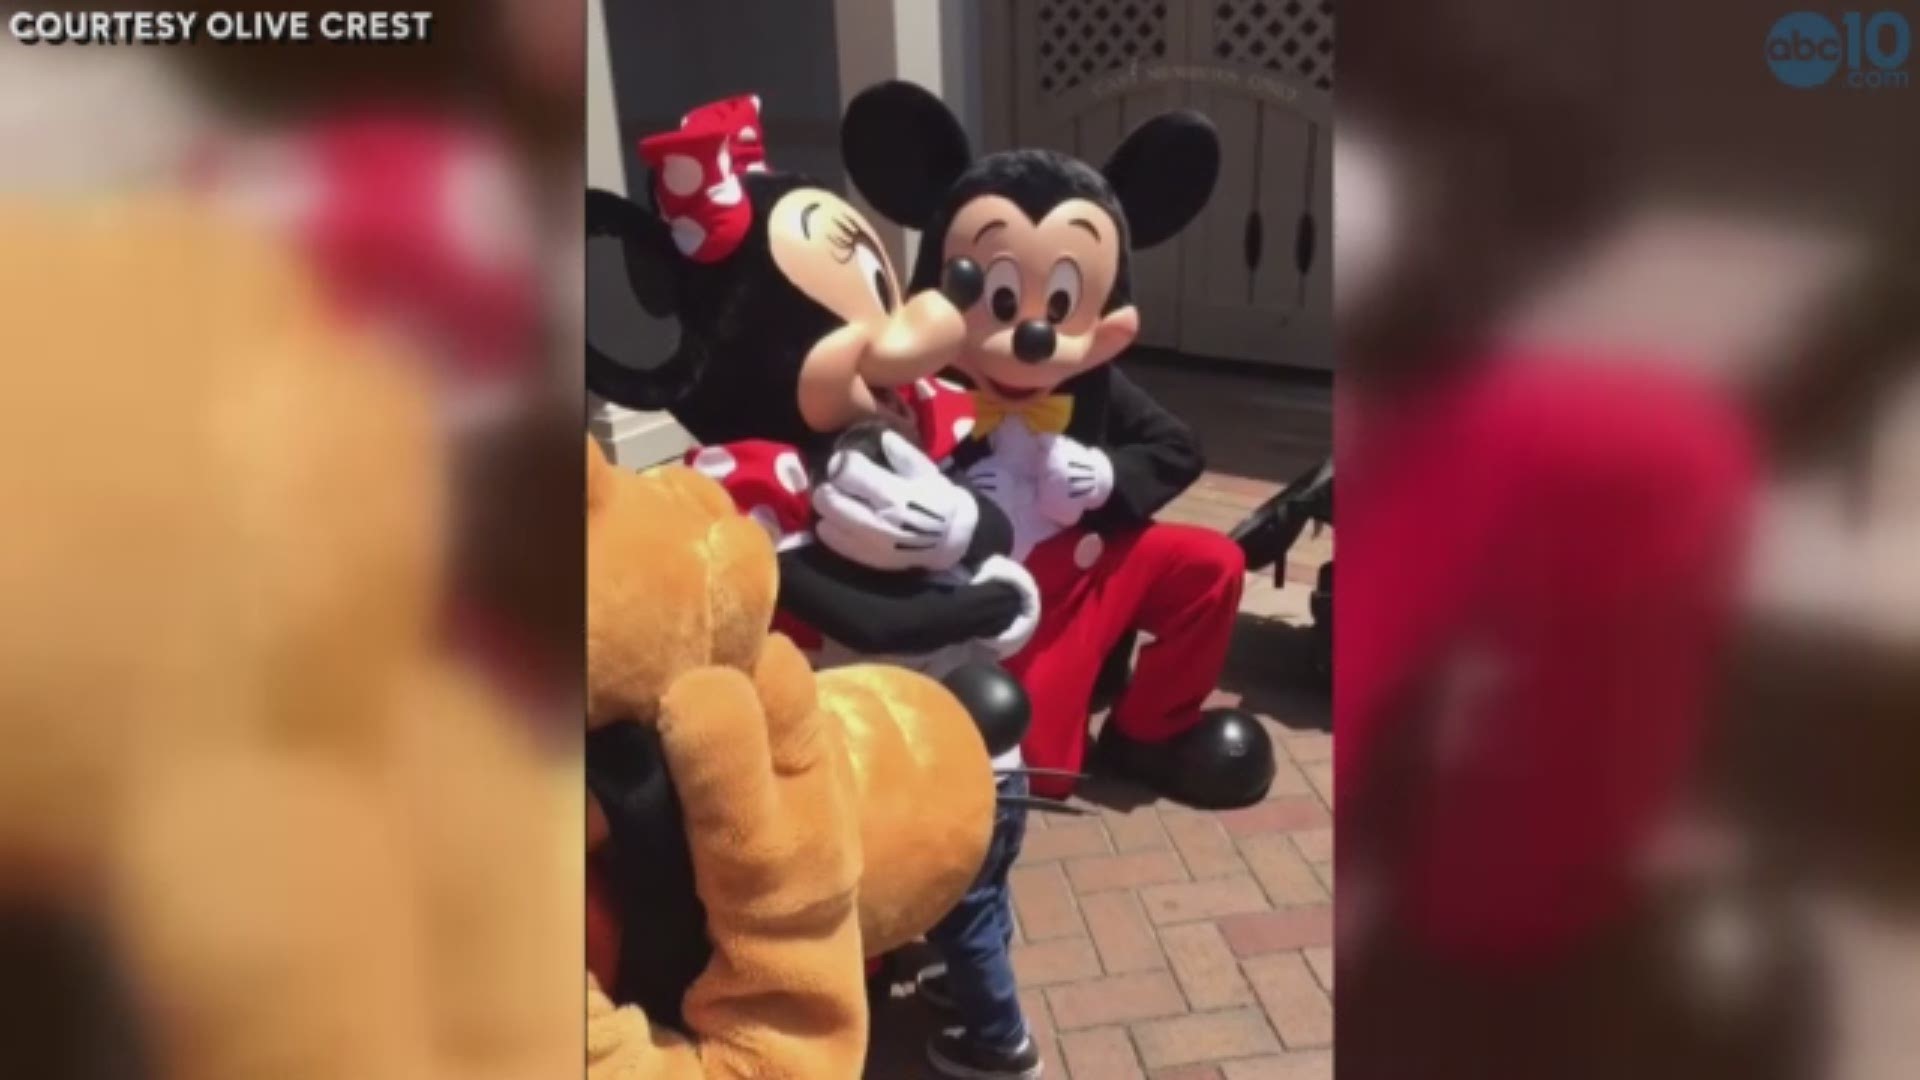 The Happiest Place on Earth helped a deaf California boy feel just a little bit happier when he and his family visited the park this month. (June 19, 2017)